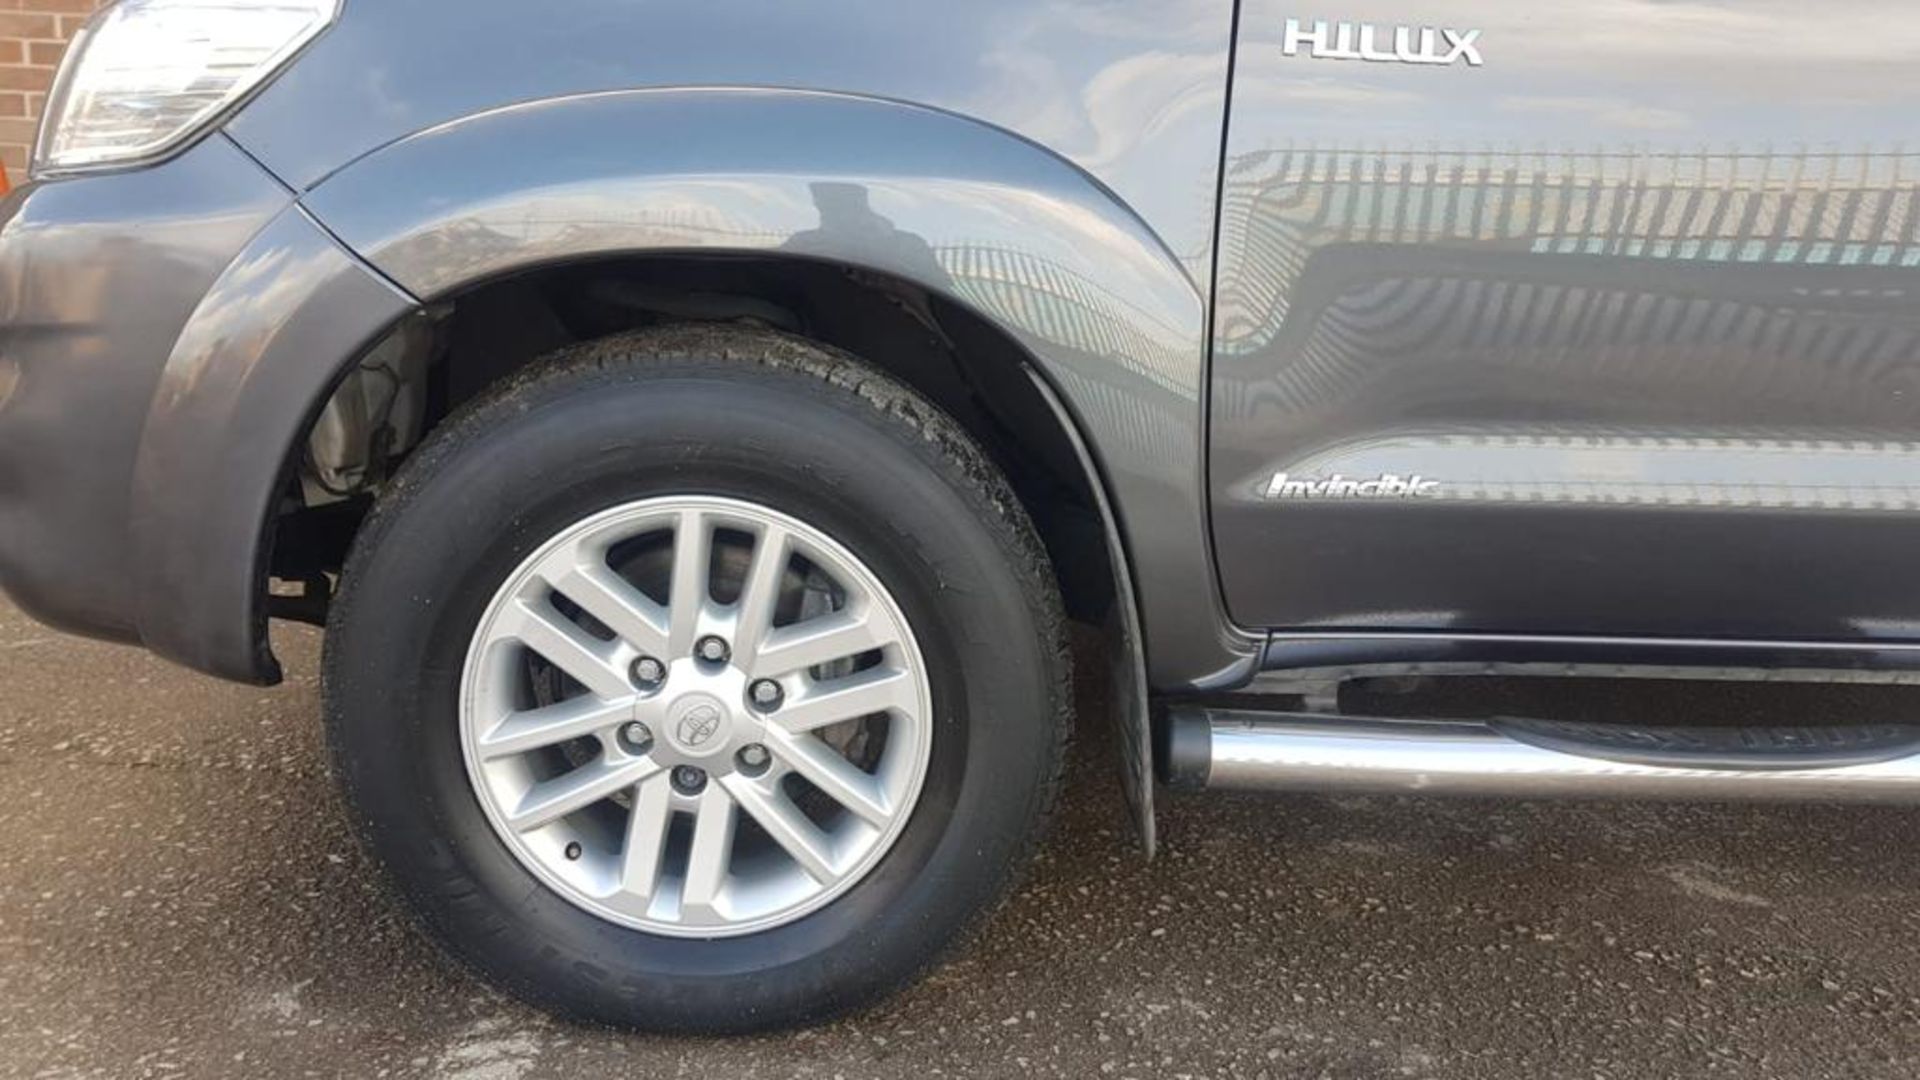 2015/64 REG TOYOTA HILUX INVINCIBLE D-4D 4X4 GREY DIESEL LIGHT UTILITY, SHOWING 1 FORMER KEEPER - Image 19 of 22